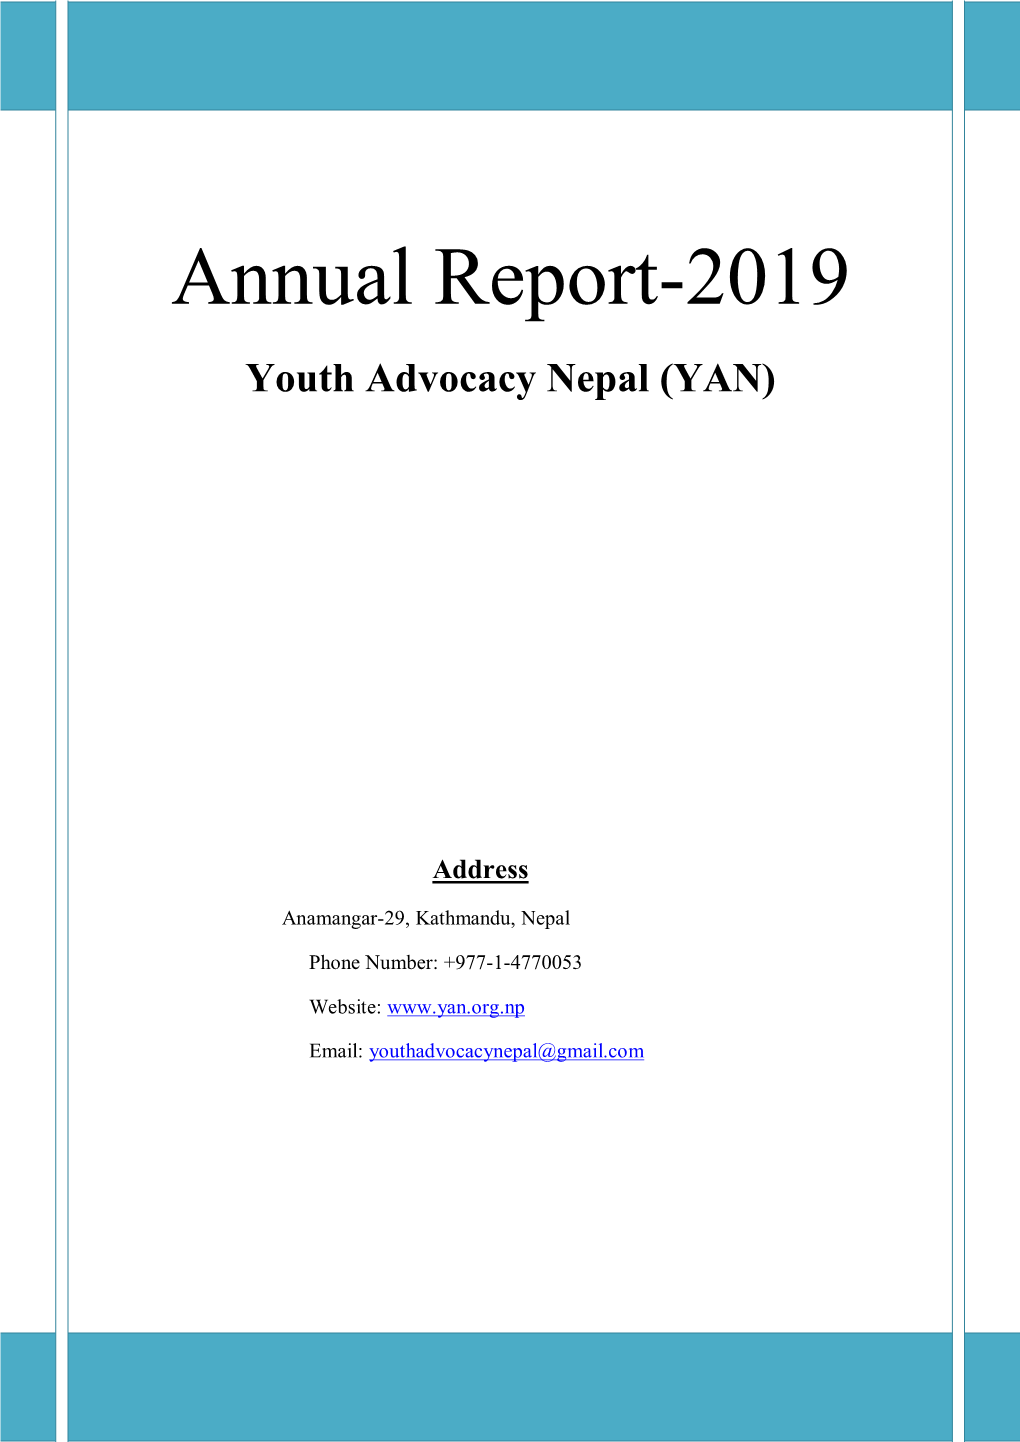 Annual Report-2019 Youth Advocacy Nepal (YAN)